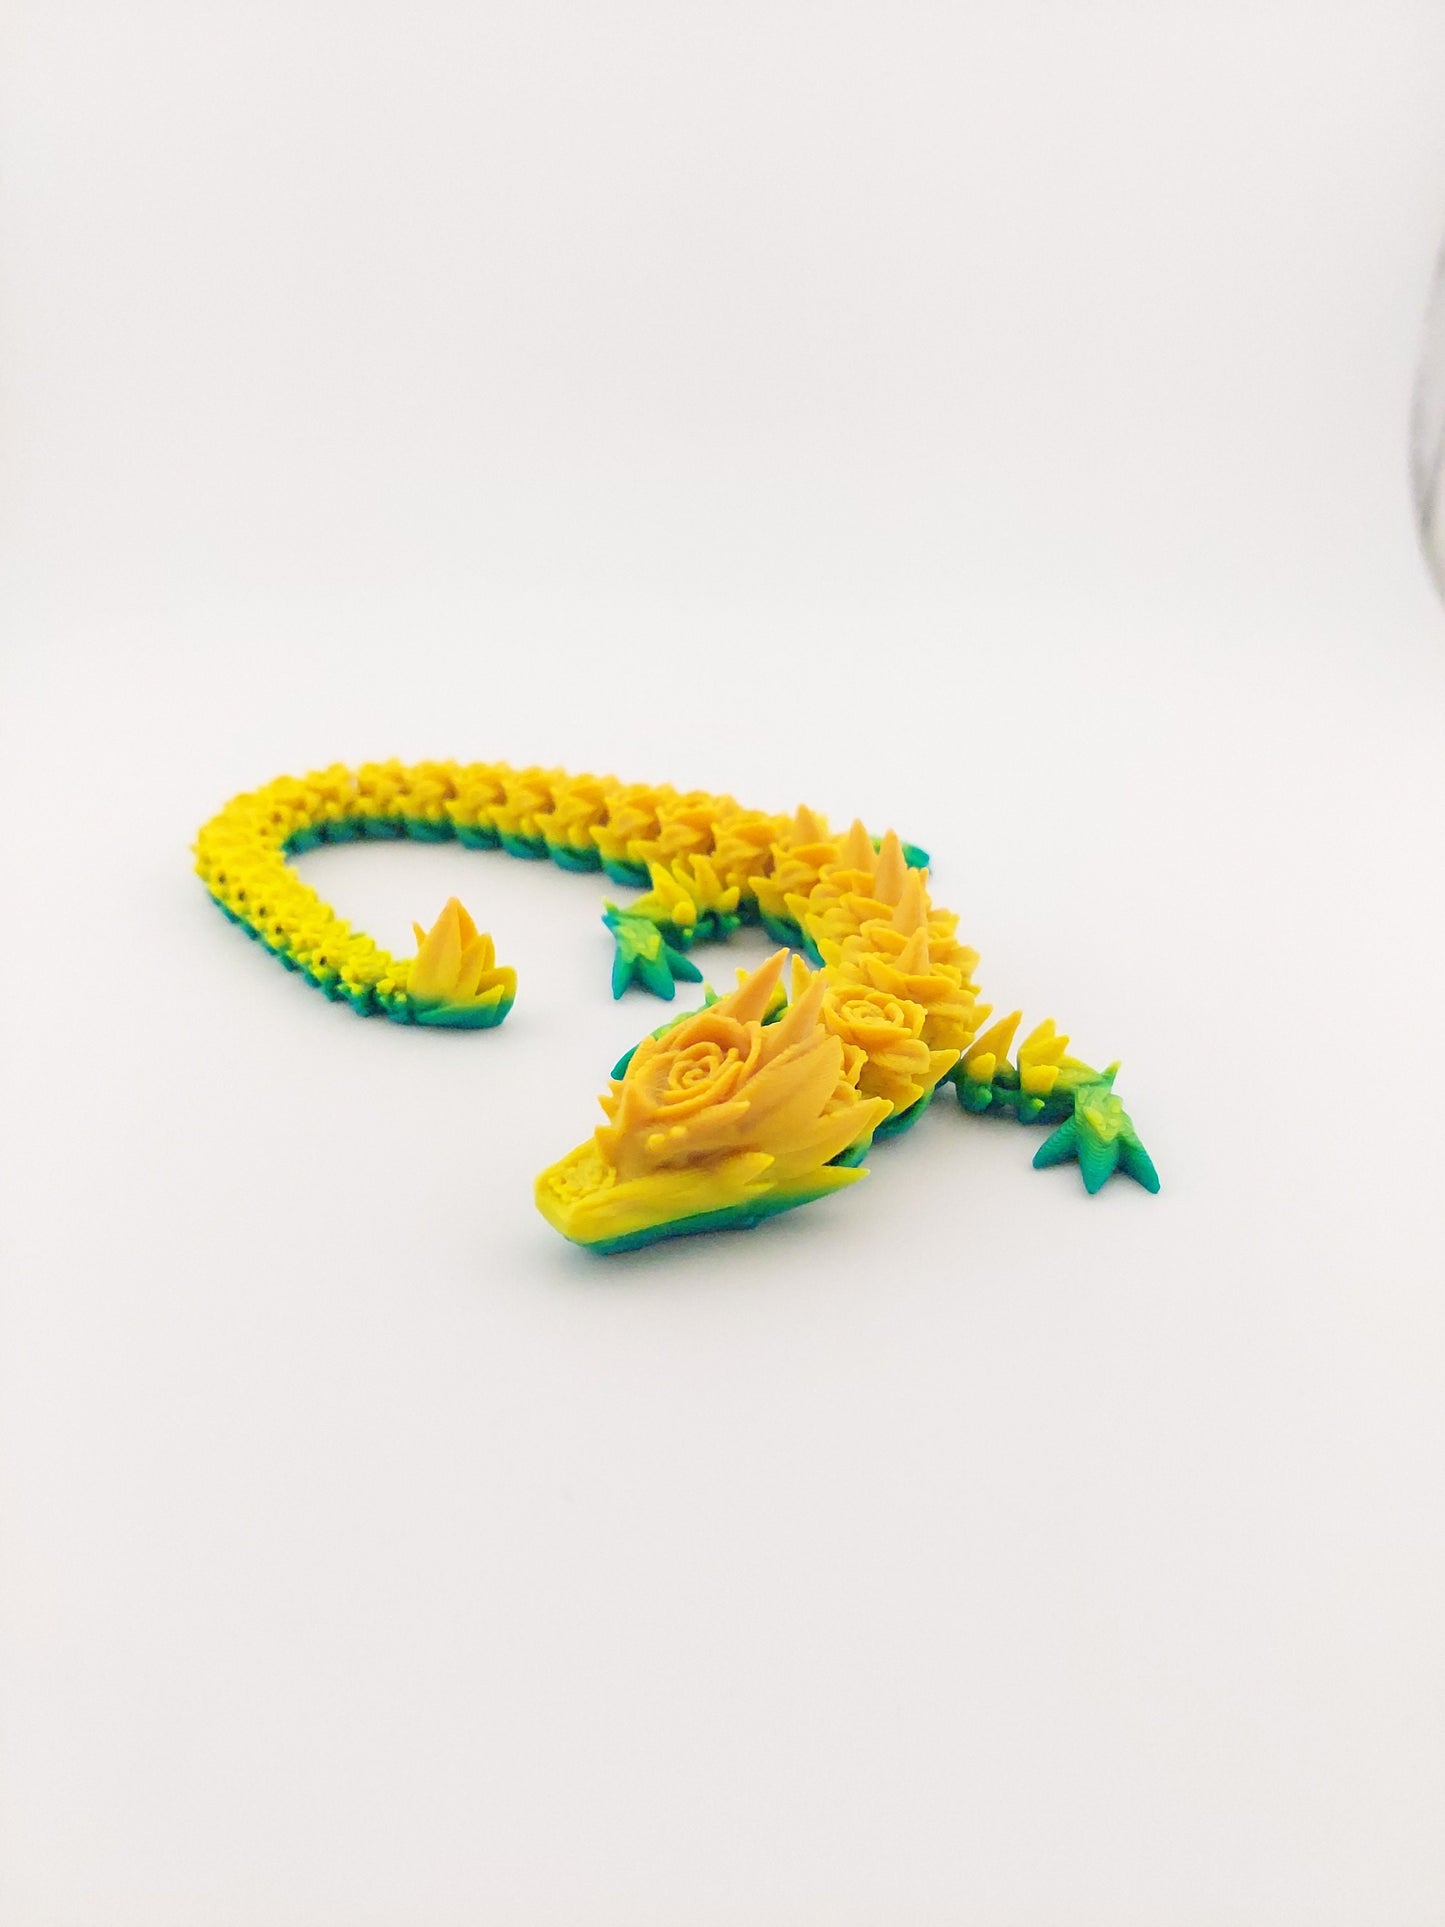 12 Inch Rose Dragon And Matching Egg! - Sensory Stress Fidget - Articulated - Cinderwing3d - 3D Printed Dragon - Unique Gift